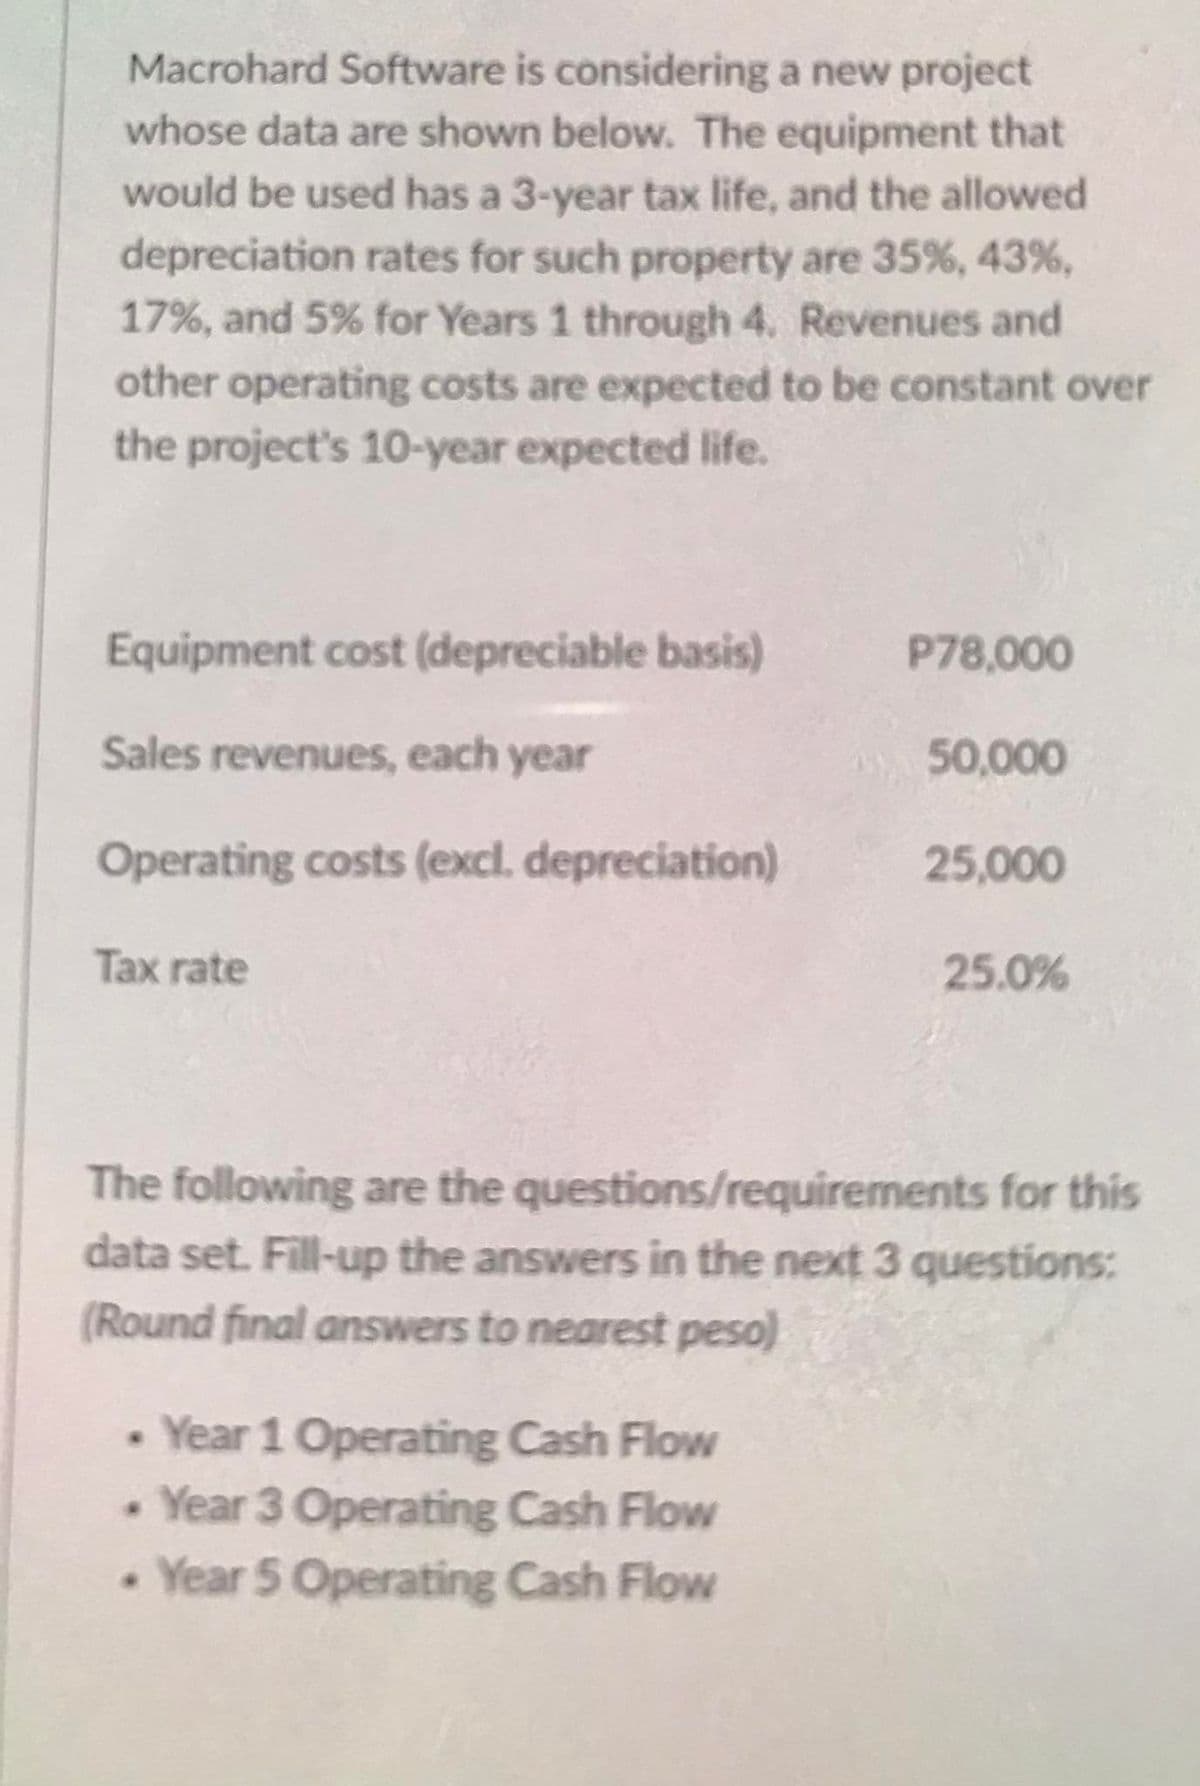 Macrohard Software is considering a new project
whose data are shown below. The equipment that
would be used has a 3-year tax life, and the allowed
depreciation rates for such property are 35 %, 43%,
17%, and 5% for Years 1 through 4. Revenues and
other operating costs are expected to be constant over
the project's 10-year expected life.
Equipment cost (depreciable basis)
P78,000
Sales revenues, each year
50,000
Operating costs (excl. depreciation)
25,000
Tax rate
25.0%
The following are the questions/requirements for this
data set. Fill-up the answers in the next 3 questions:
(Round final answers to nearest peso)
Year 1 Operating Cash Flow
• Year 3 Operating Cash Flow
Year 5 Operating Cash Flow
